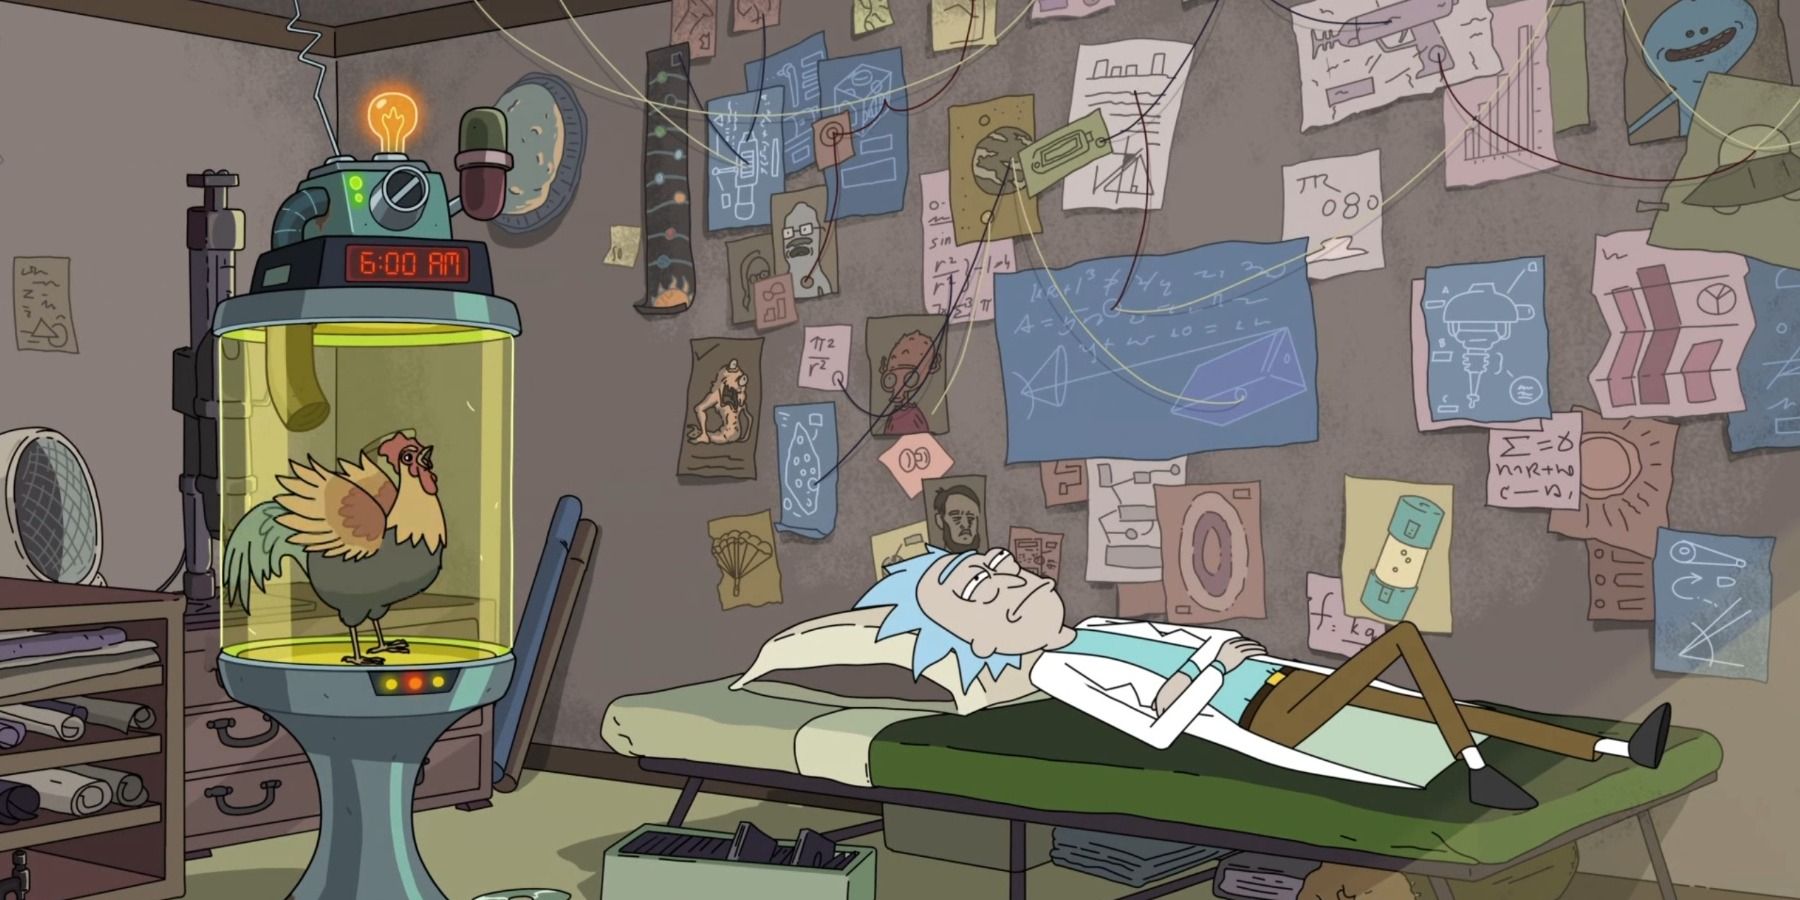 Rick's bedroom in Rick and Morty season 6 Nigh Family episode